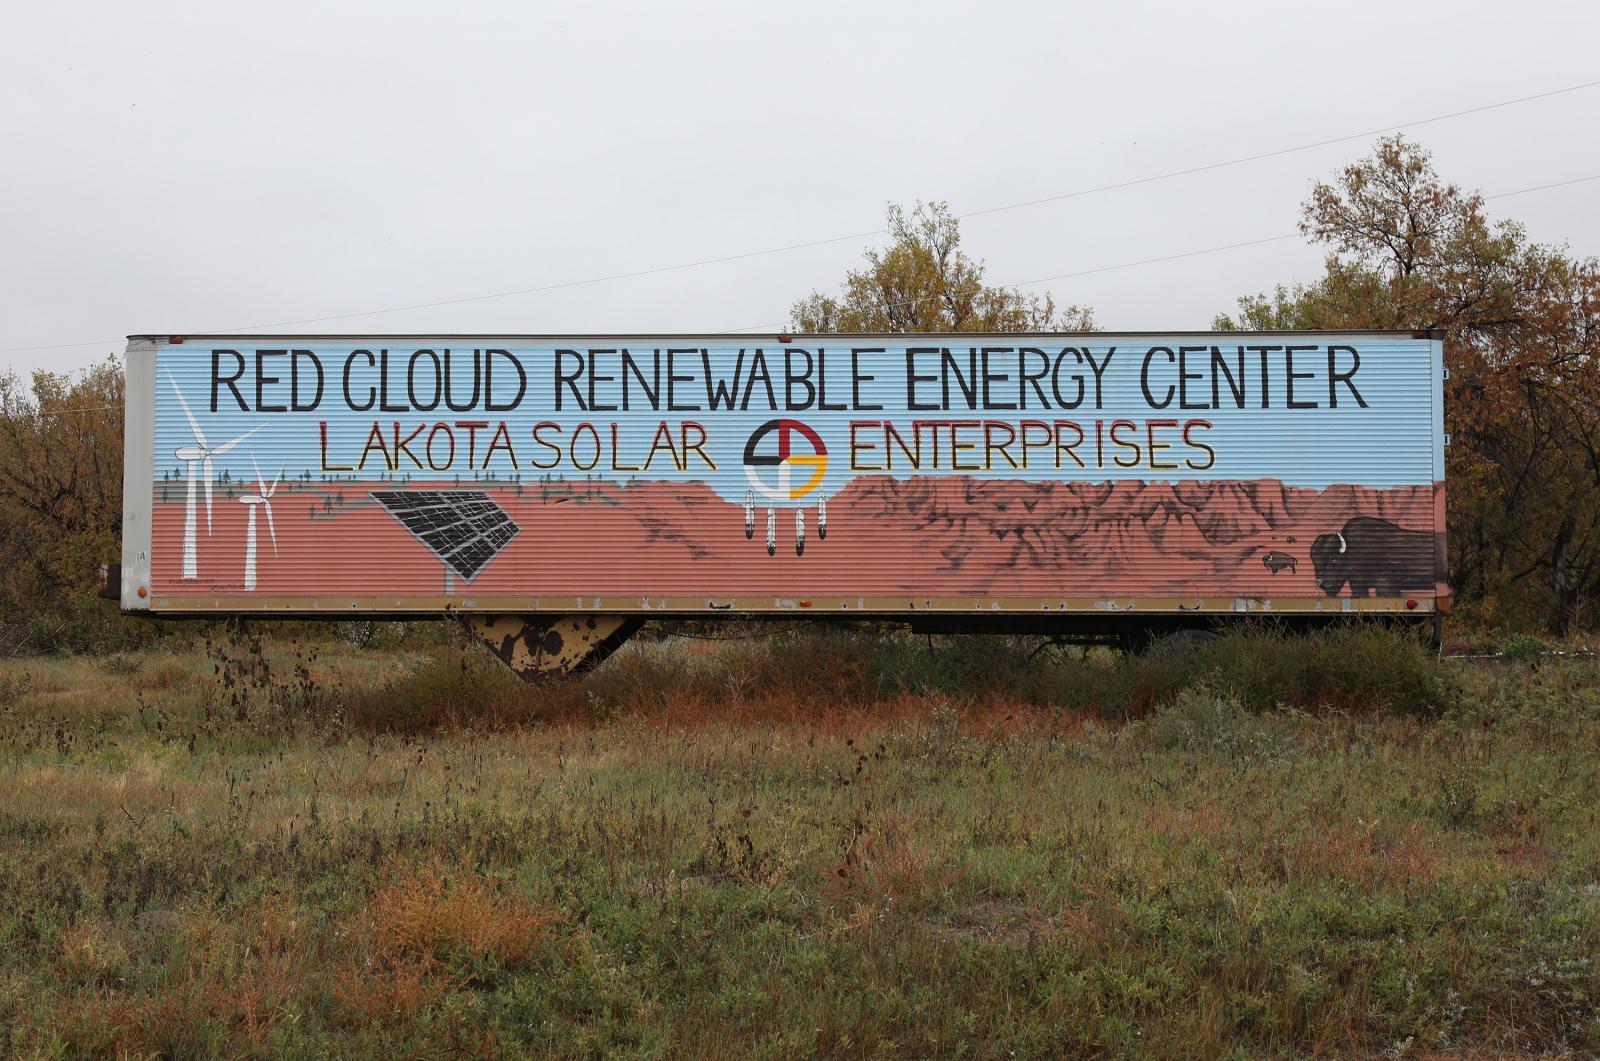 The entrance to the Red Cloud Renewable Energy Center is seen on the Pine Ridge reservation in South Dakota, U.S., Sept. 28, 2018. Picture taken Sept. 28, 2018. REUTERS/Emilie Richardson